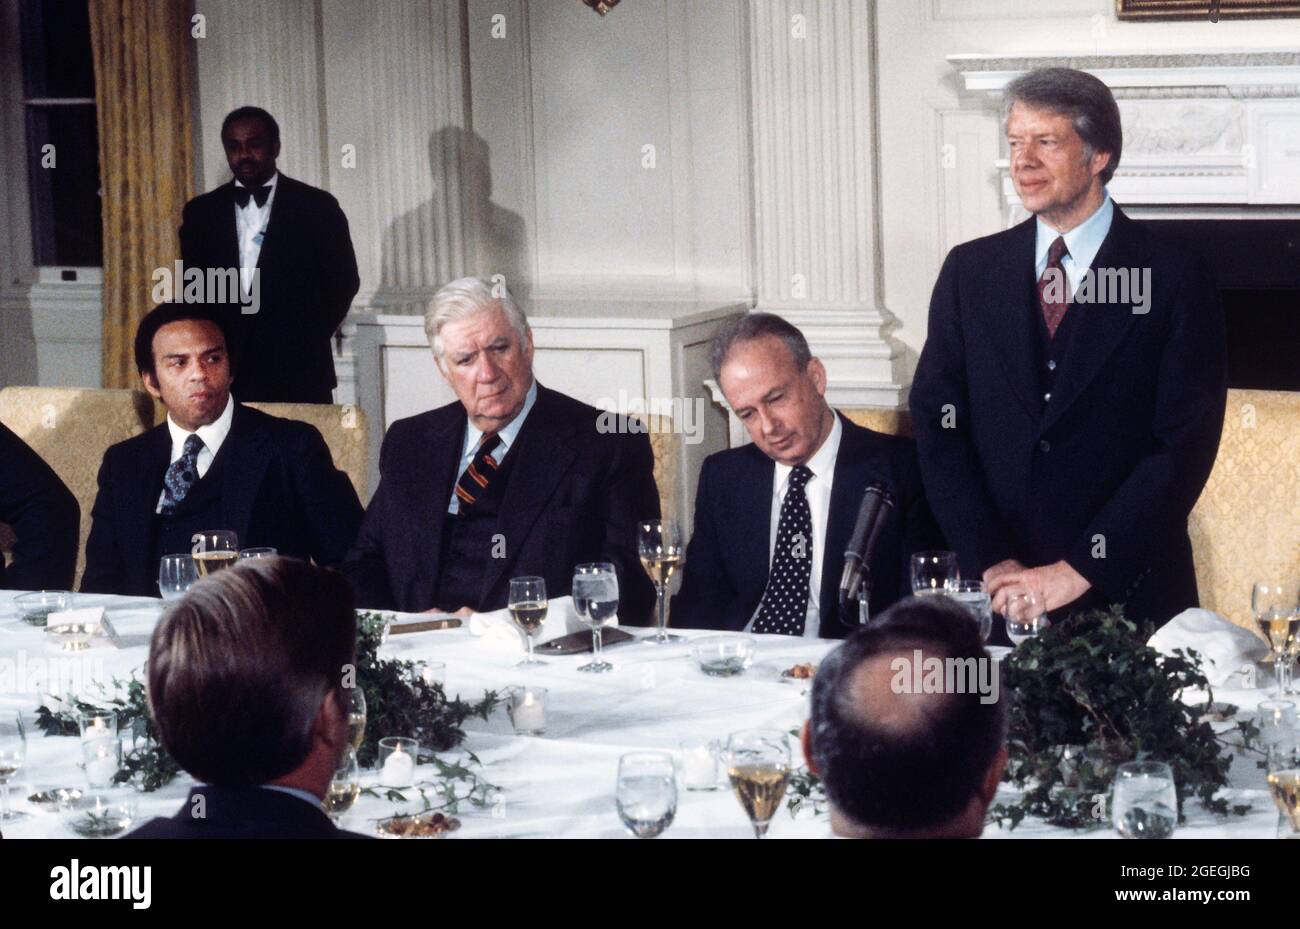 United States President Jimmy Carter, right, offers remarks at a working dinner in honor of Prime Minister Yitzhak Rabin of Israel, right center, in the State Dining Room of the White House in Washington, DC on Monday, March 7, 1977. Looking on is Speaker of the US House of Representatives Tip O'Neill (Democrat of Massachusetts), left center, and US Ambassador to the United Nations Andrew Young.Credit: Benjamin E. 'Gene' Forte/CNP/Sipa USA Credit: Sipa USA/Alamy Live News Stock Photo